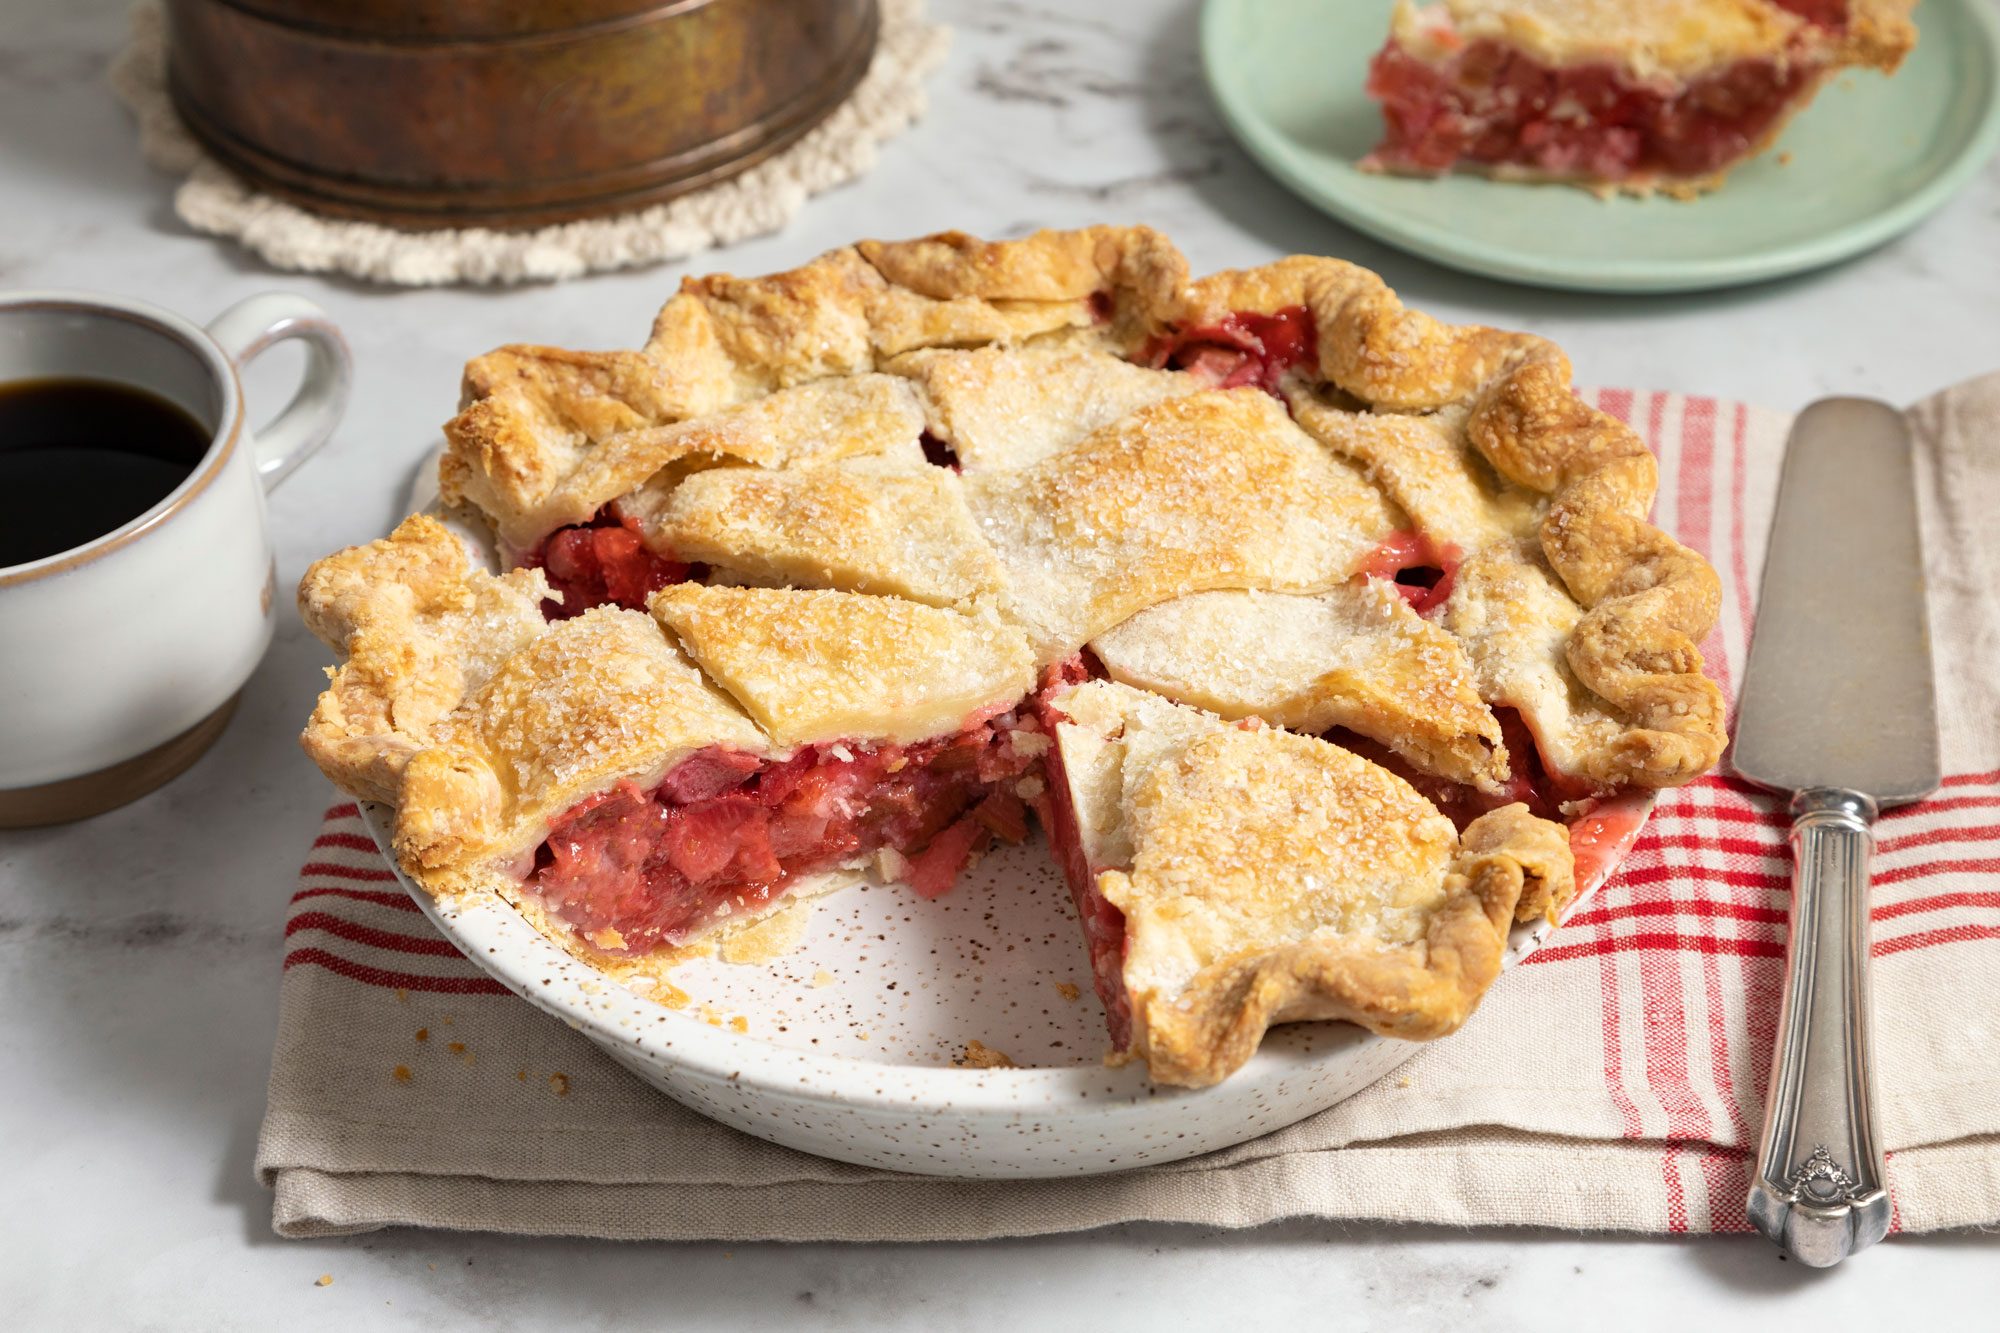 Strawberry Rhubarb Pie sliced and served in plate